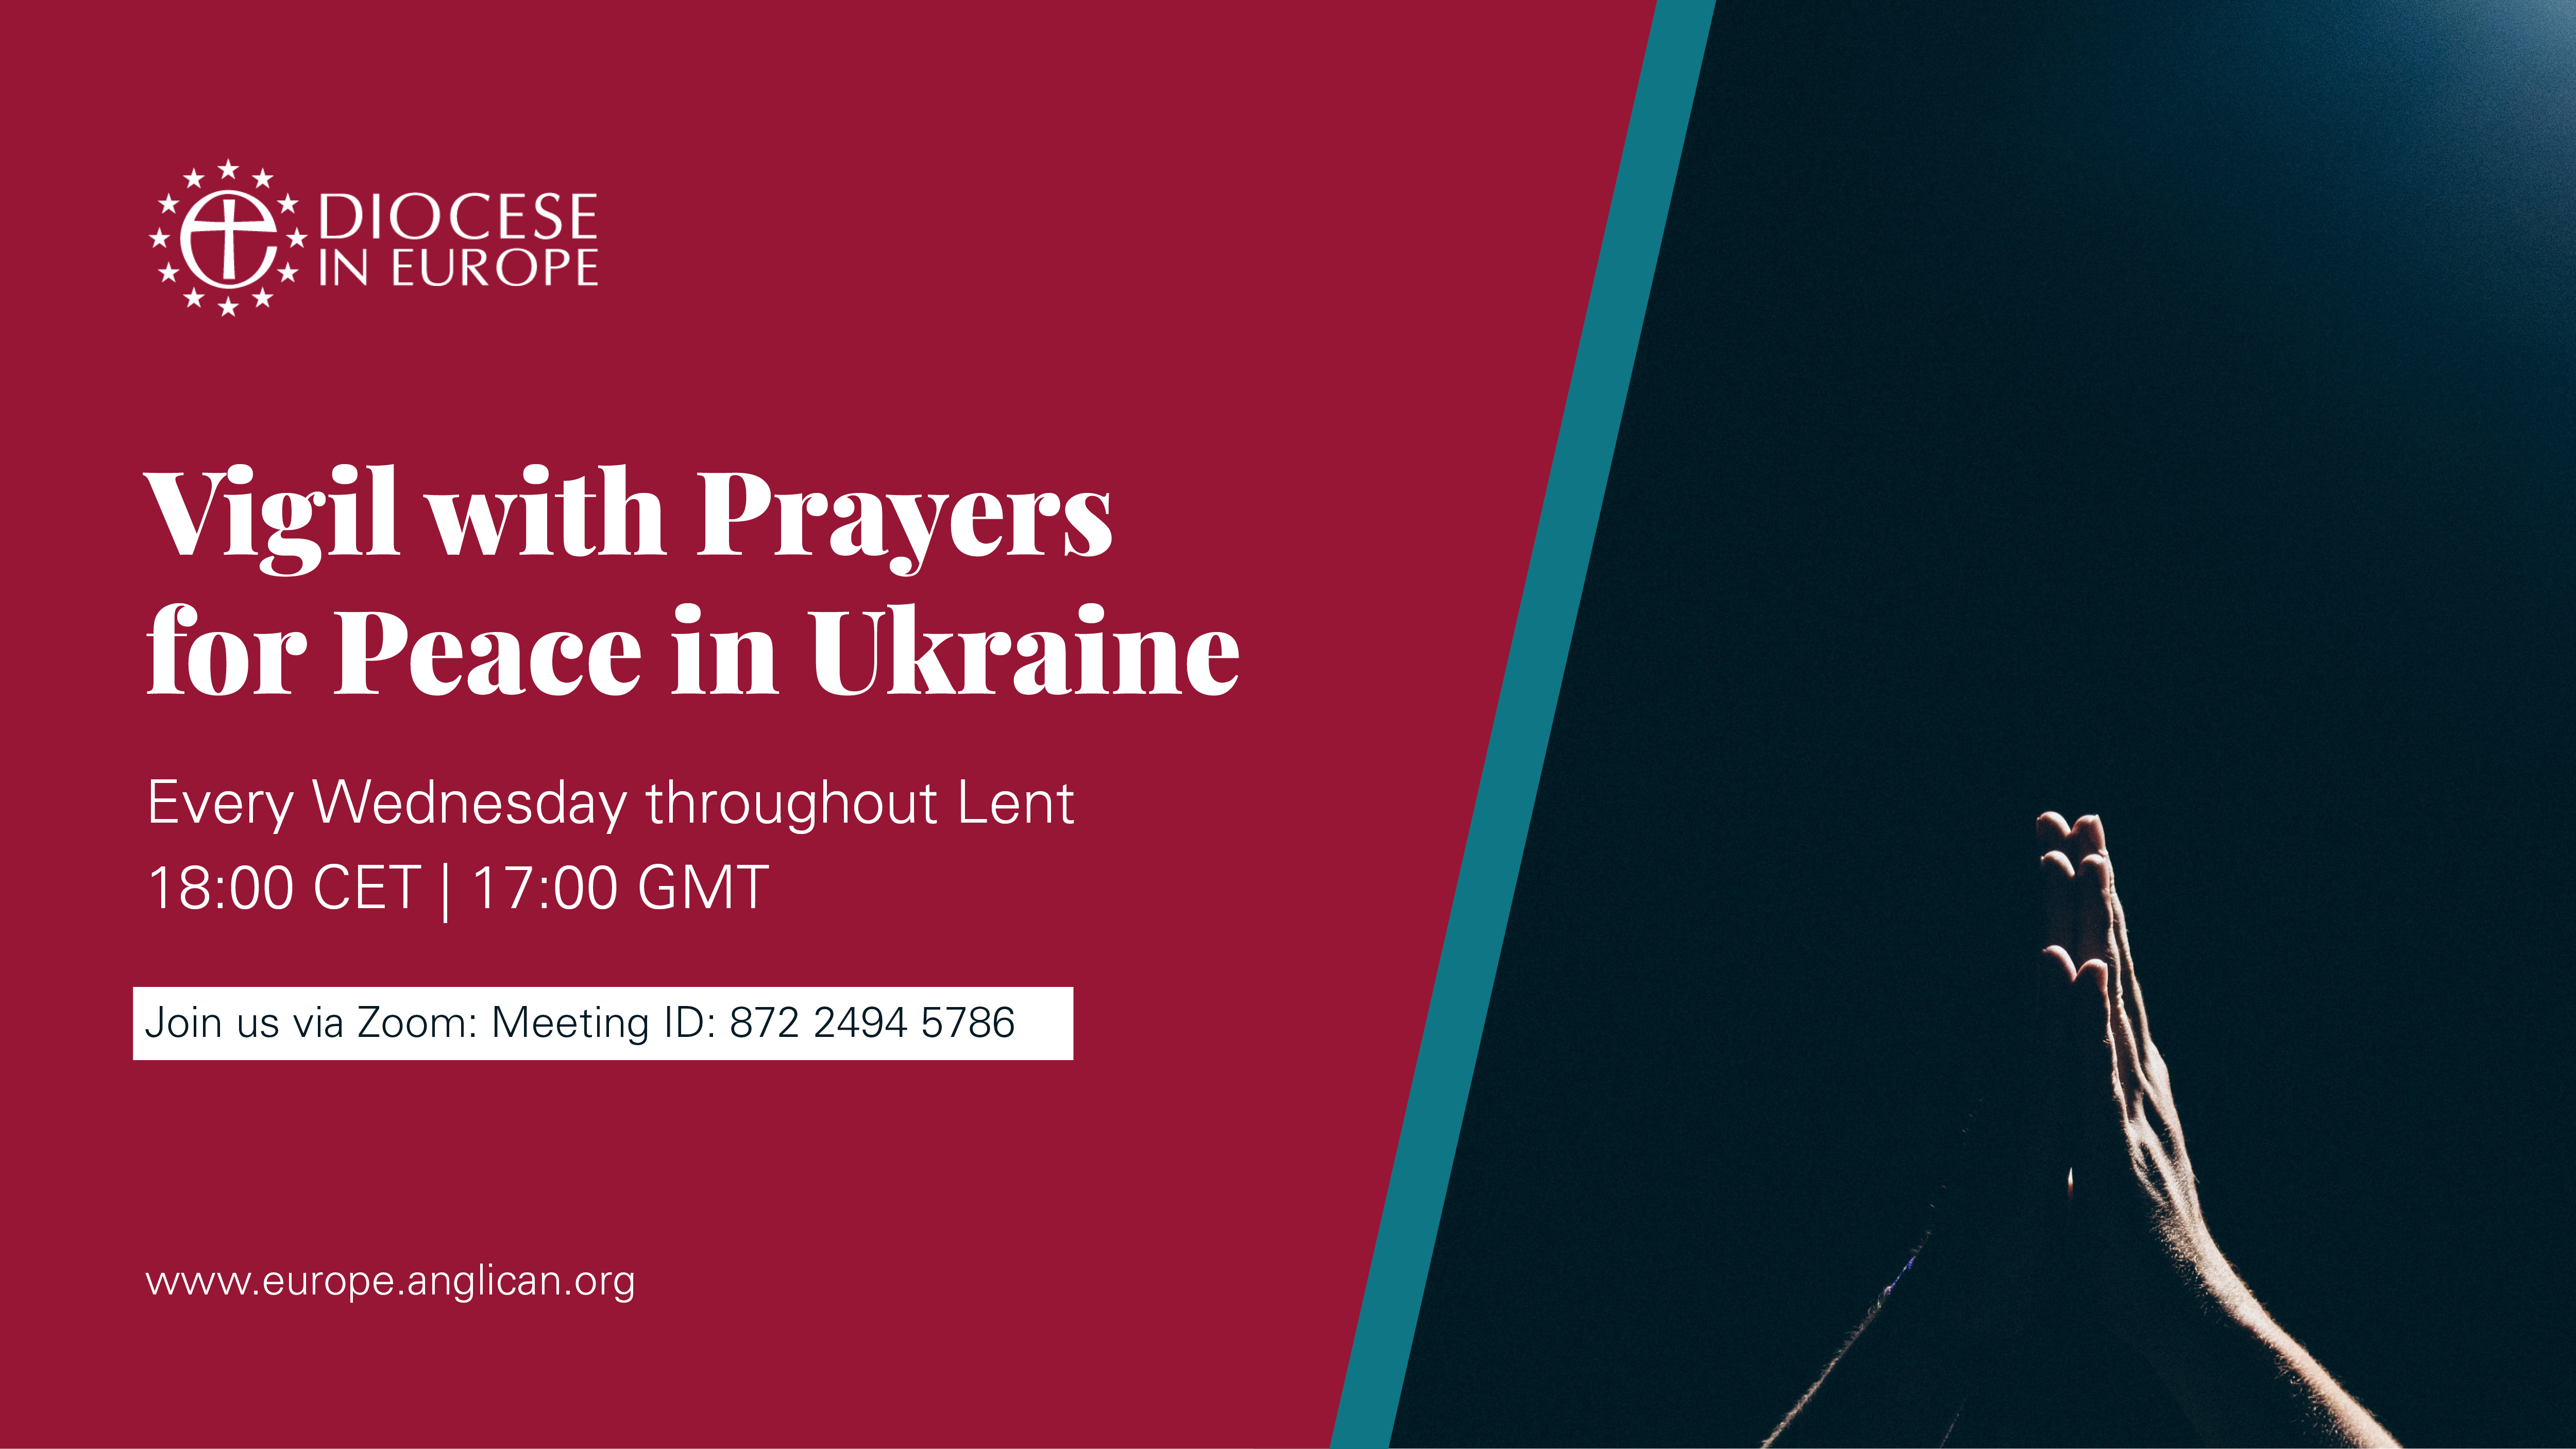 A poster for prayers for peace in Ukraine.